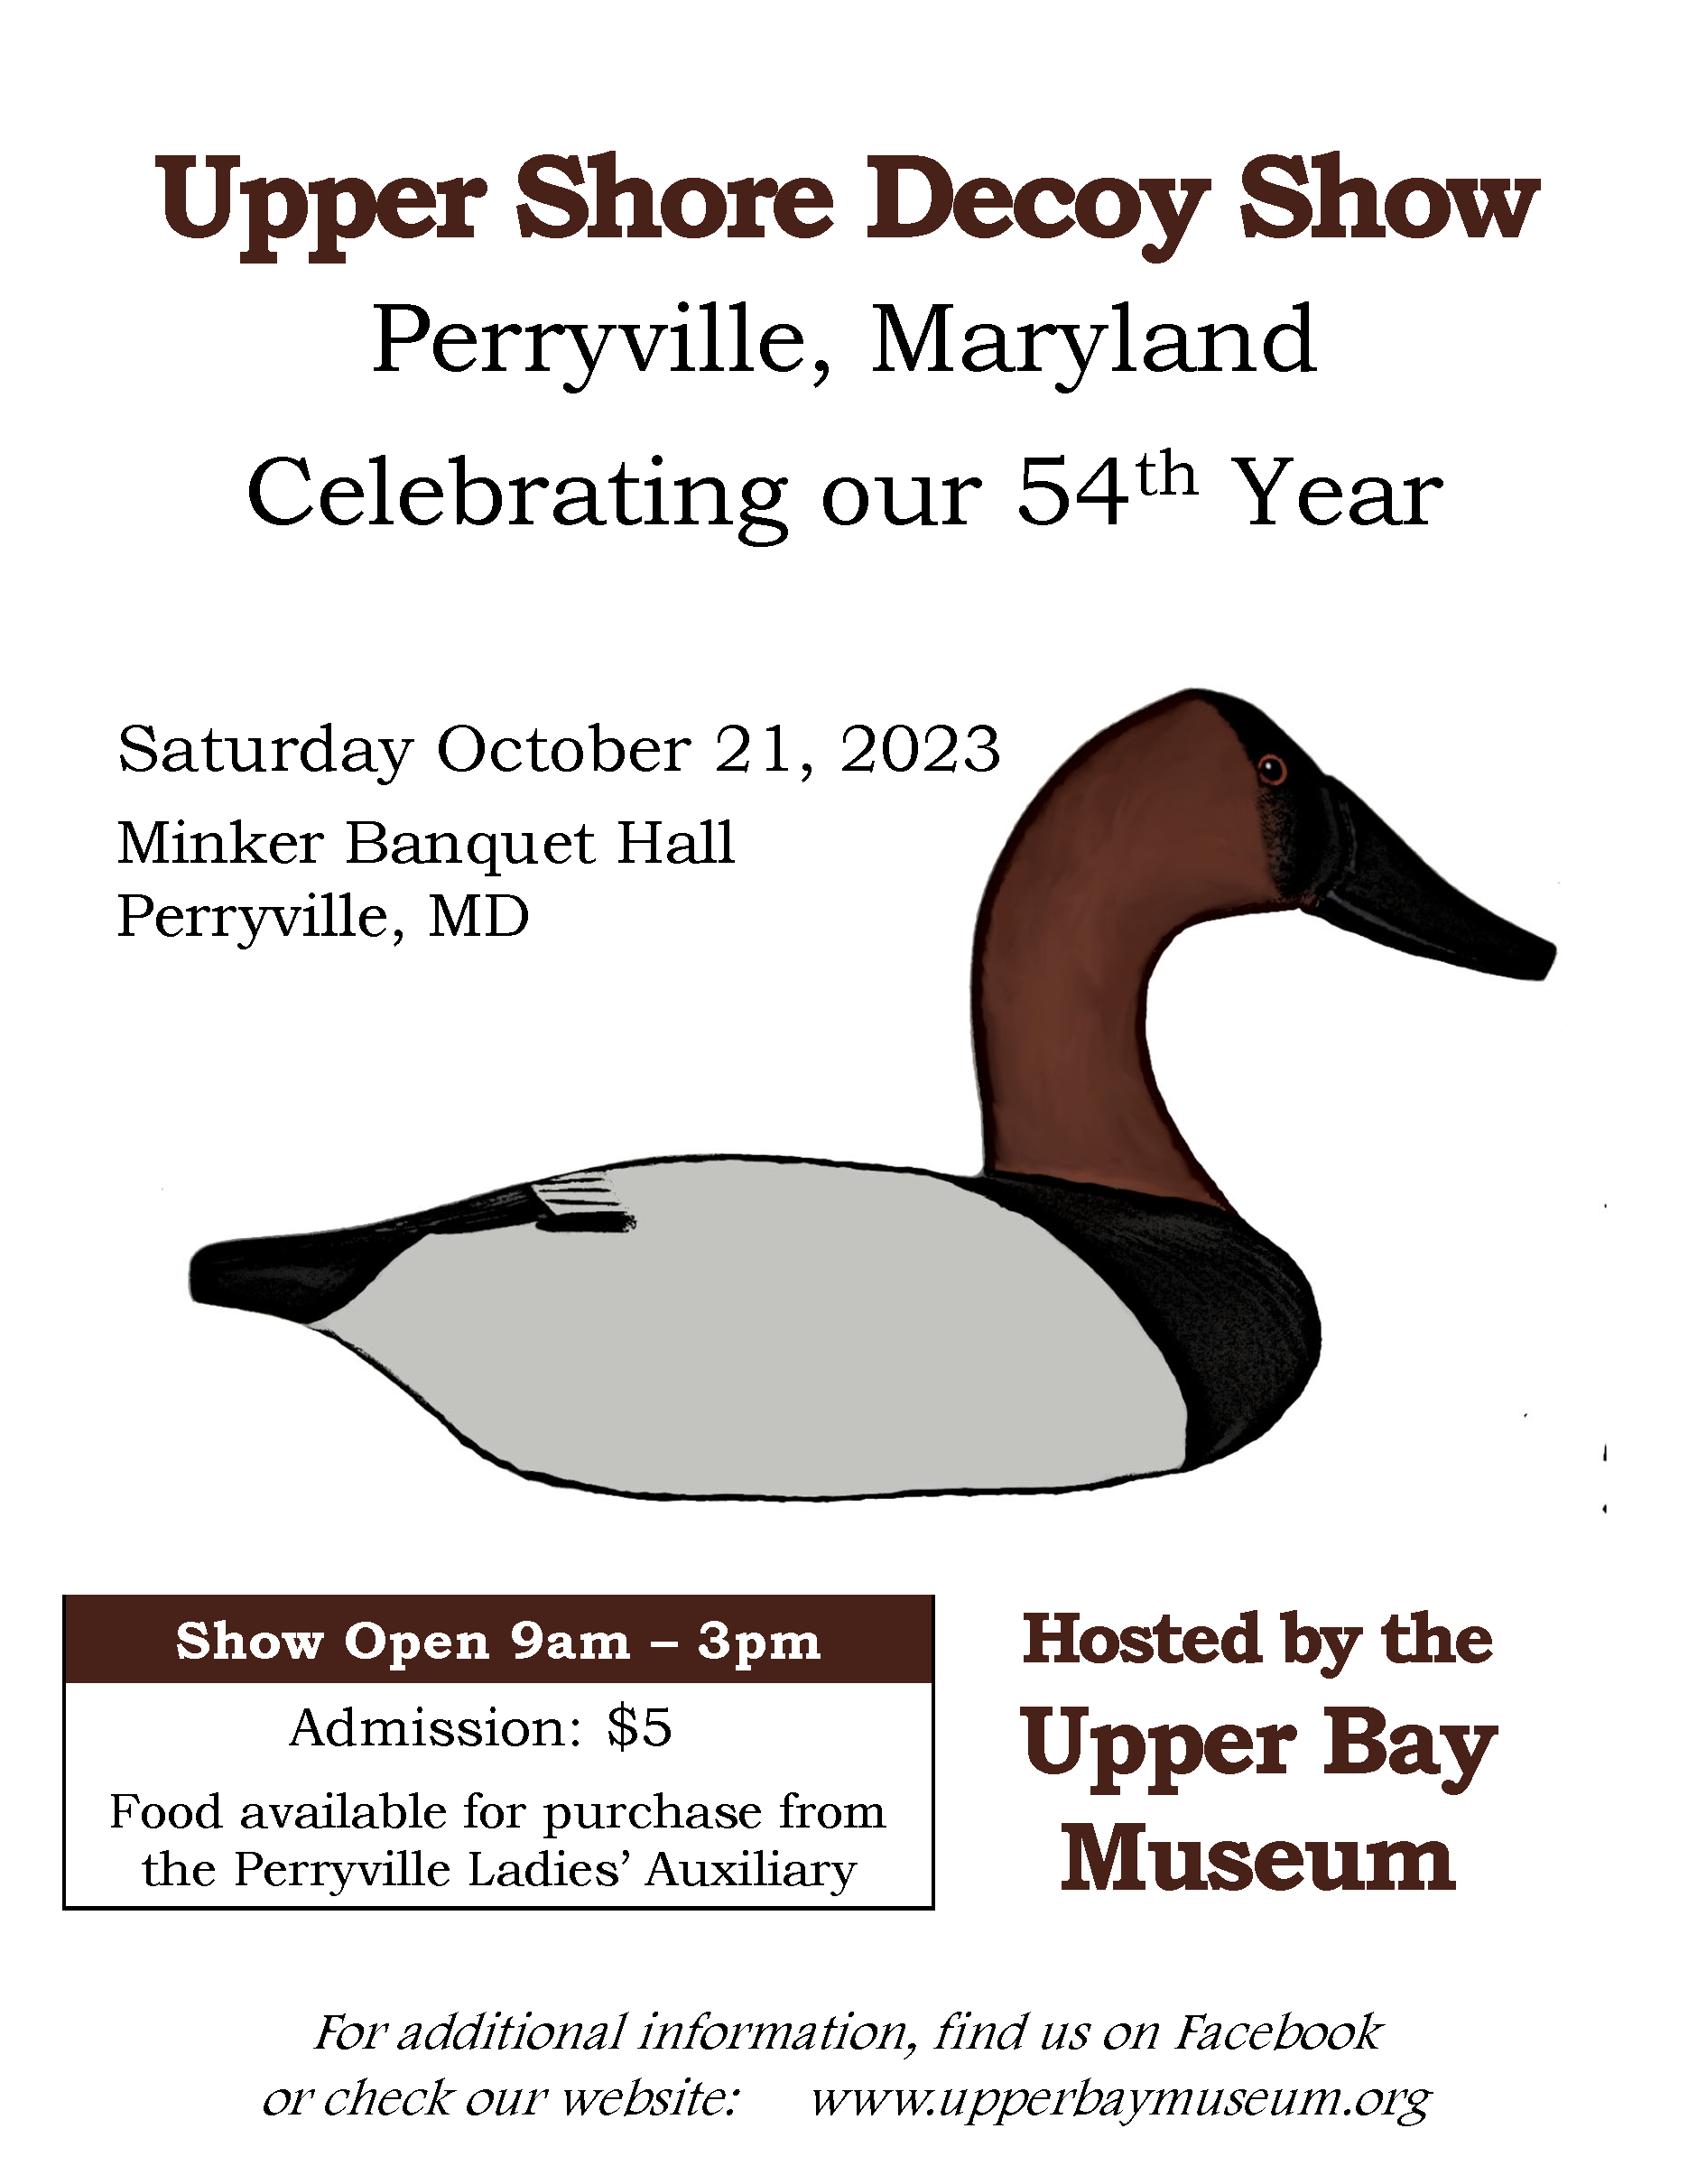 Upper Shore Decoy Show 2023 to North East, Maryland